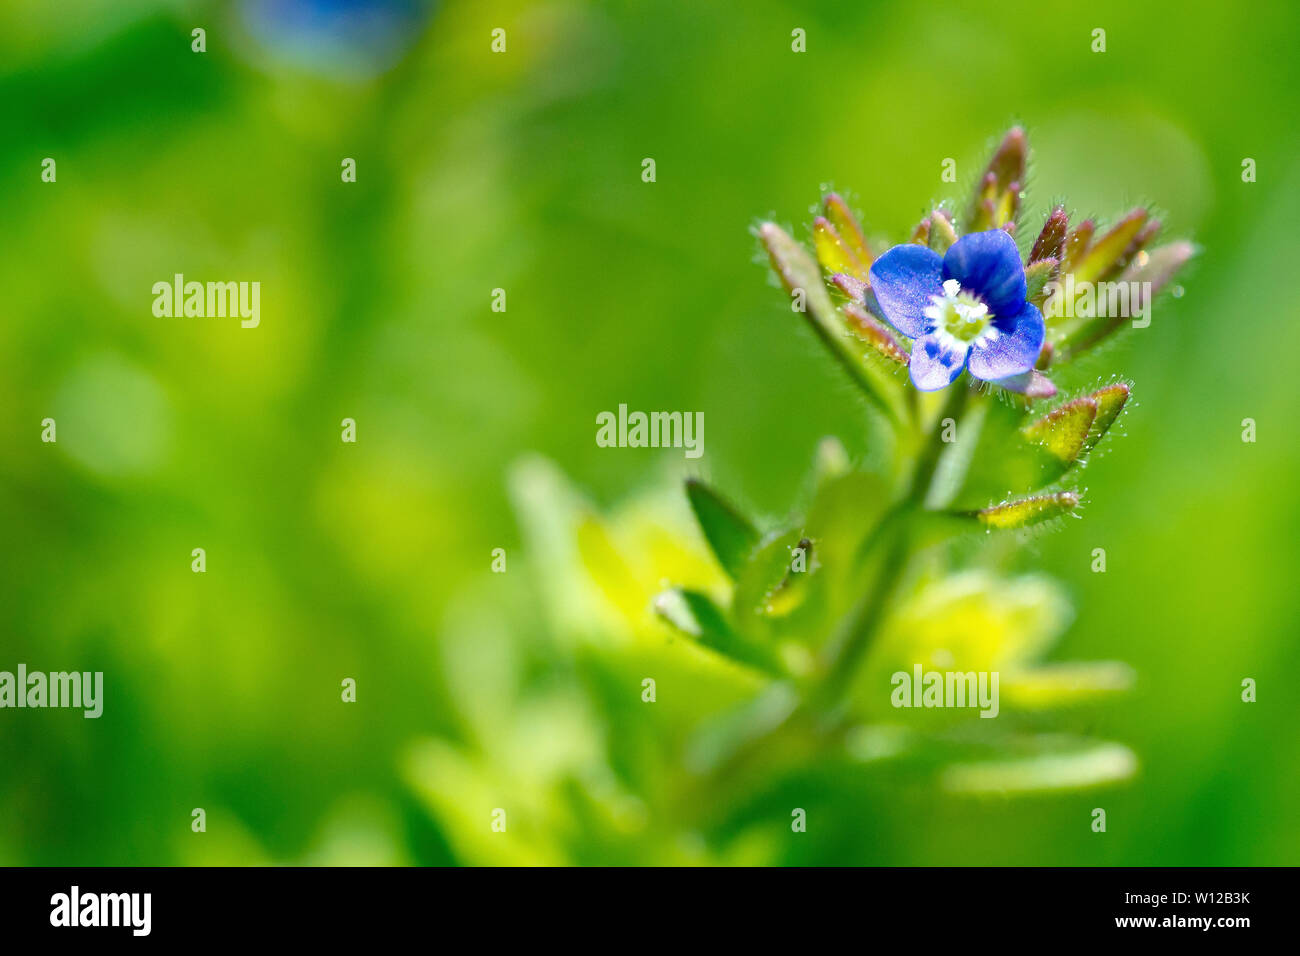 Wall Speedwell (veronica arvensis), close up of one of the tiny blue flowers of the plant. Stock Photo